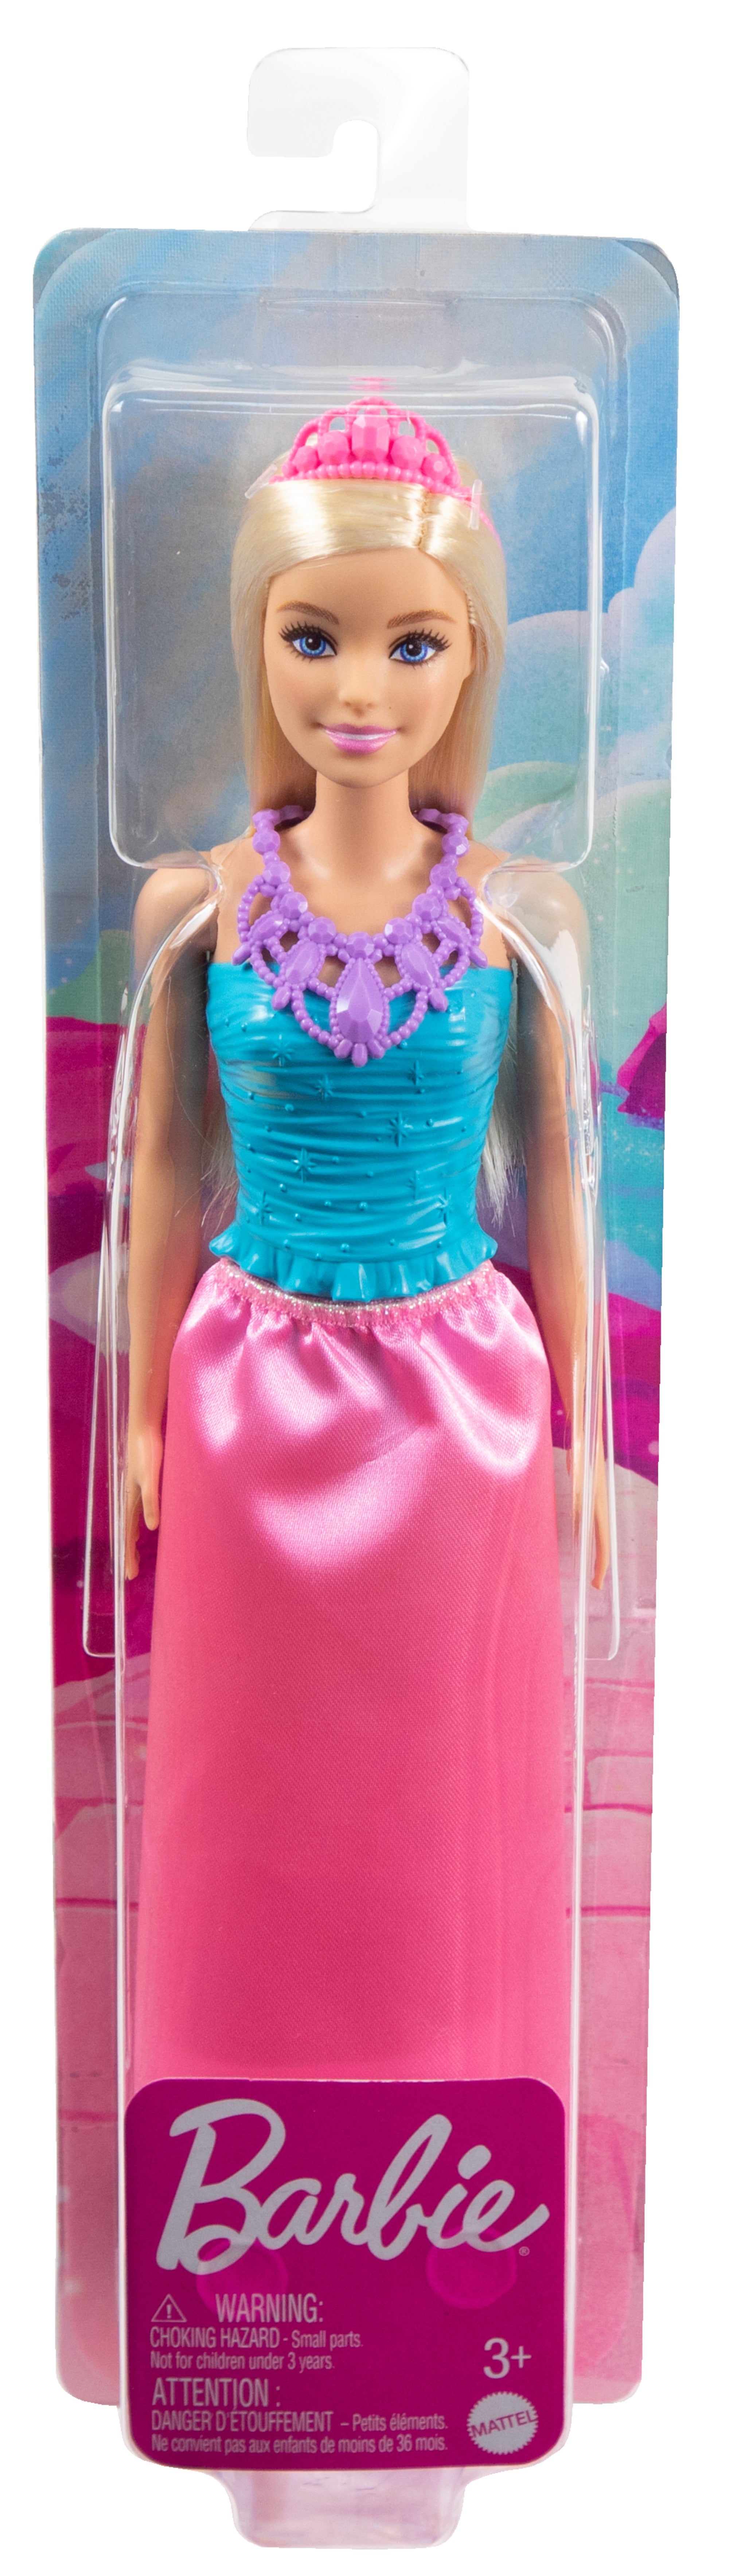 Barbie Dreamtopia Princess Blonde Doll Wearing Pink Skirt, Shoes and Tiara for Kids Ages 3+